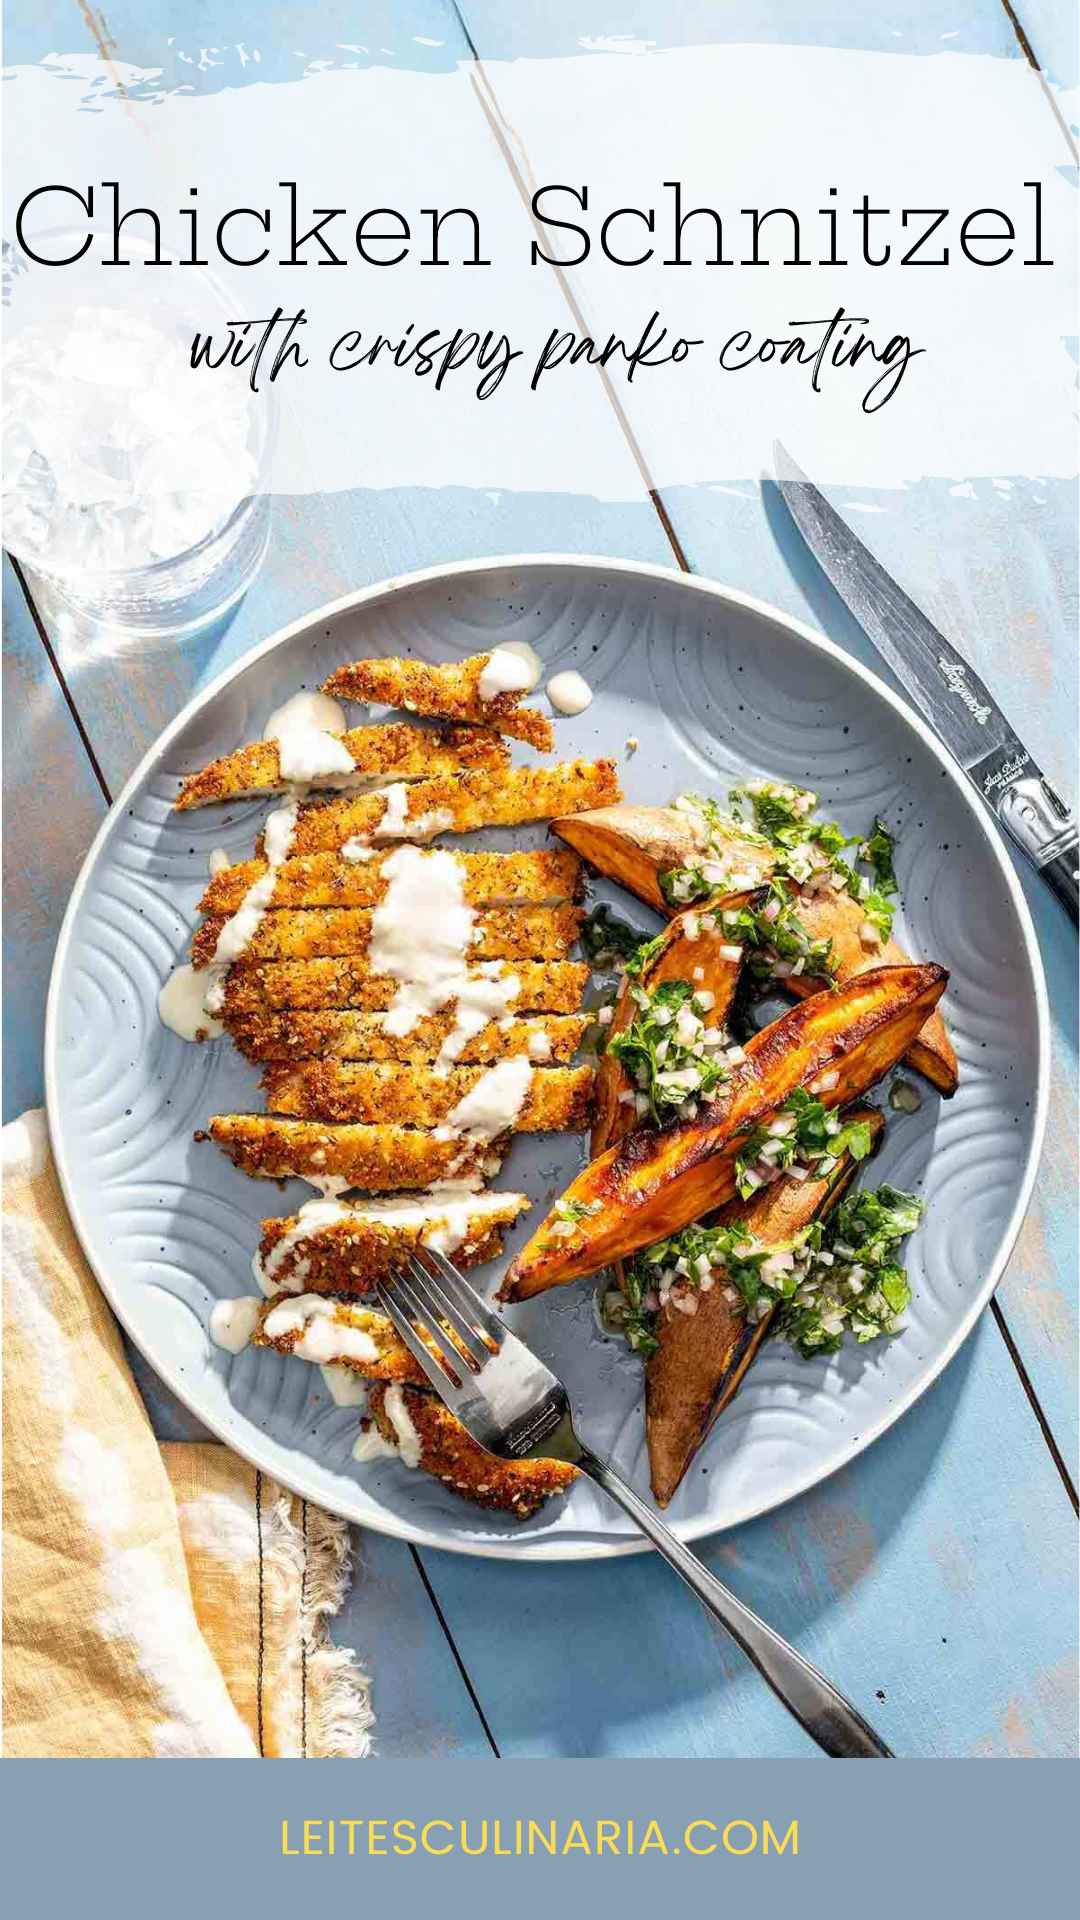 A sliced chicken cutlet with panko coating on a plate with sweet potato wedges and a vinaigrette dressing.